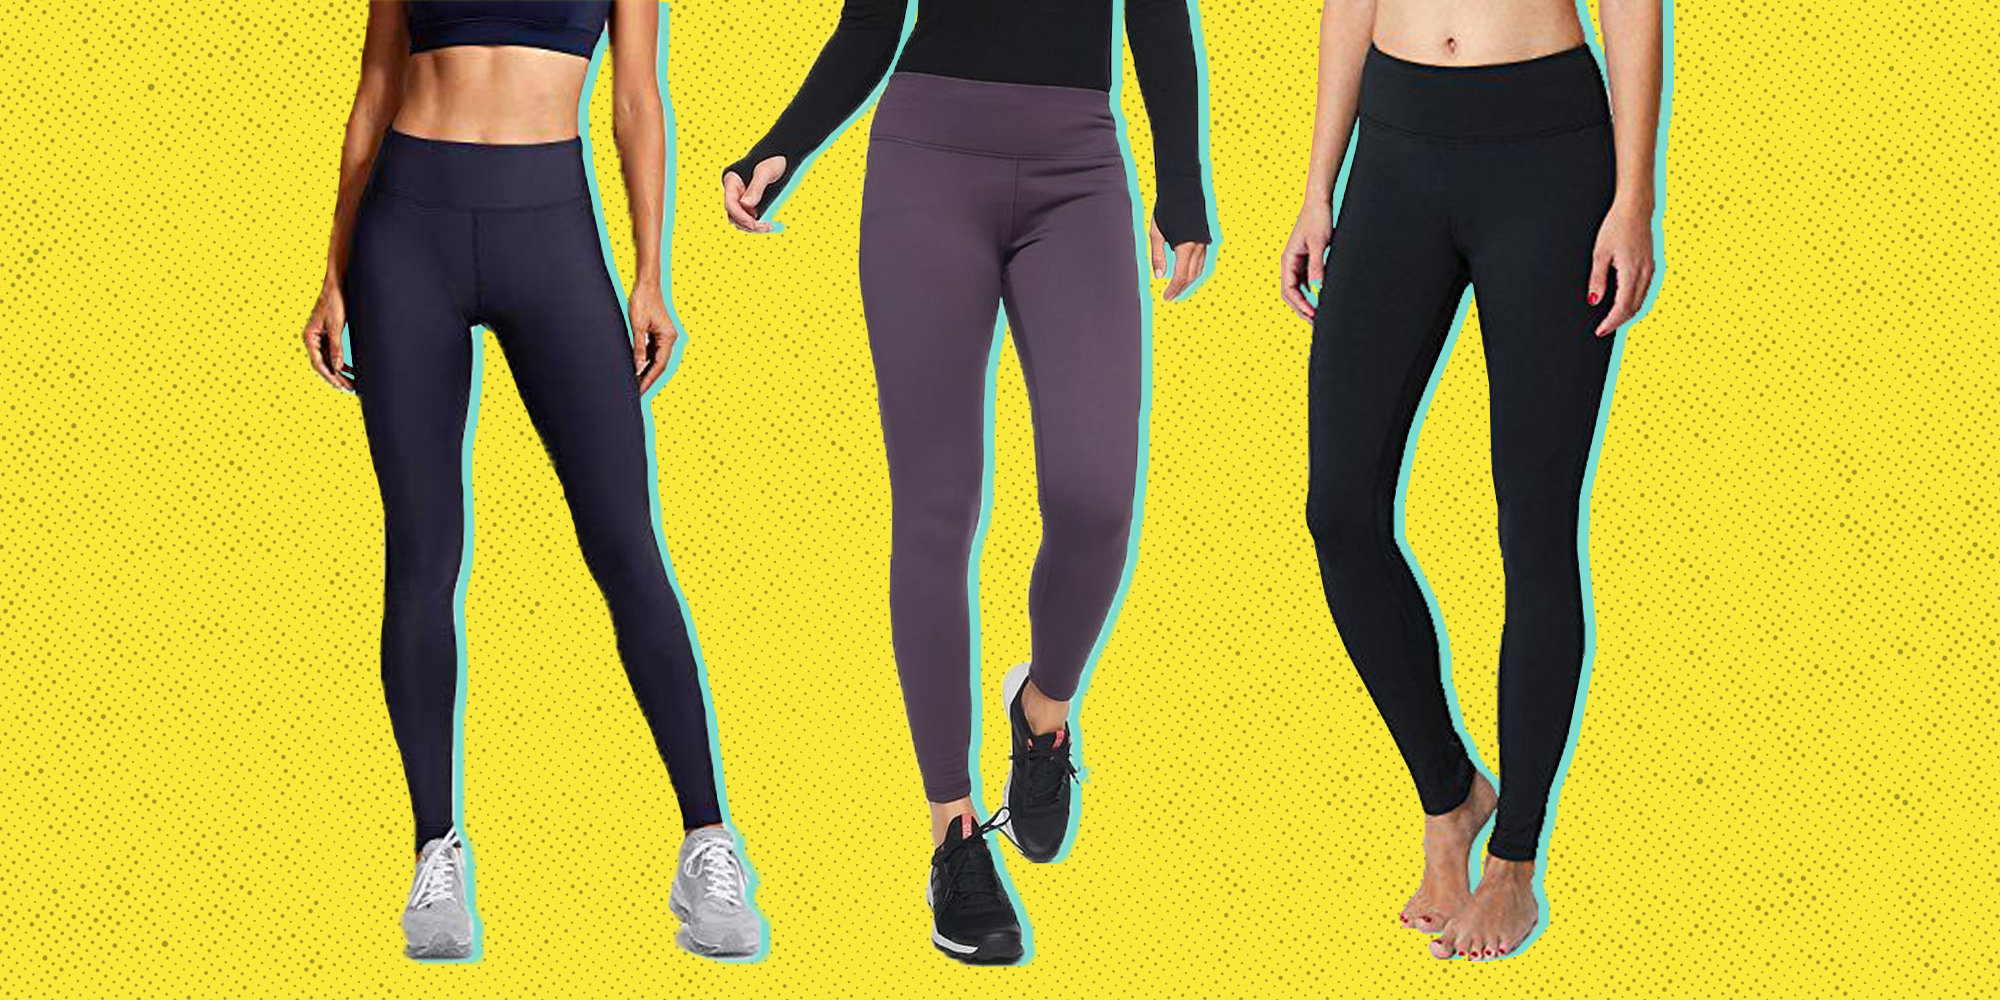 Winter Workout Running Tights with Pockets High Waist Warm Fleece Lined Leggings TSLA Womens Thermal Yoga Pants